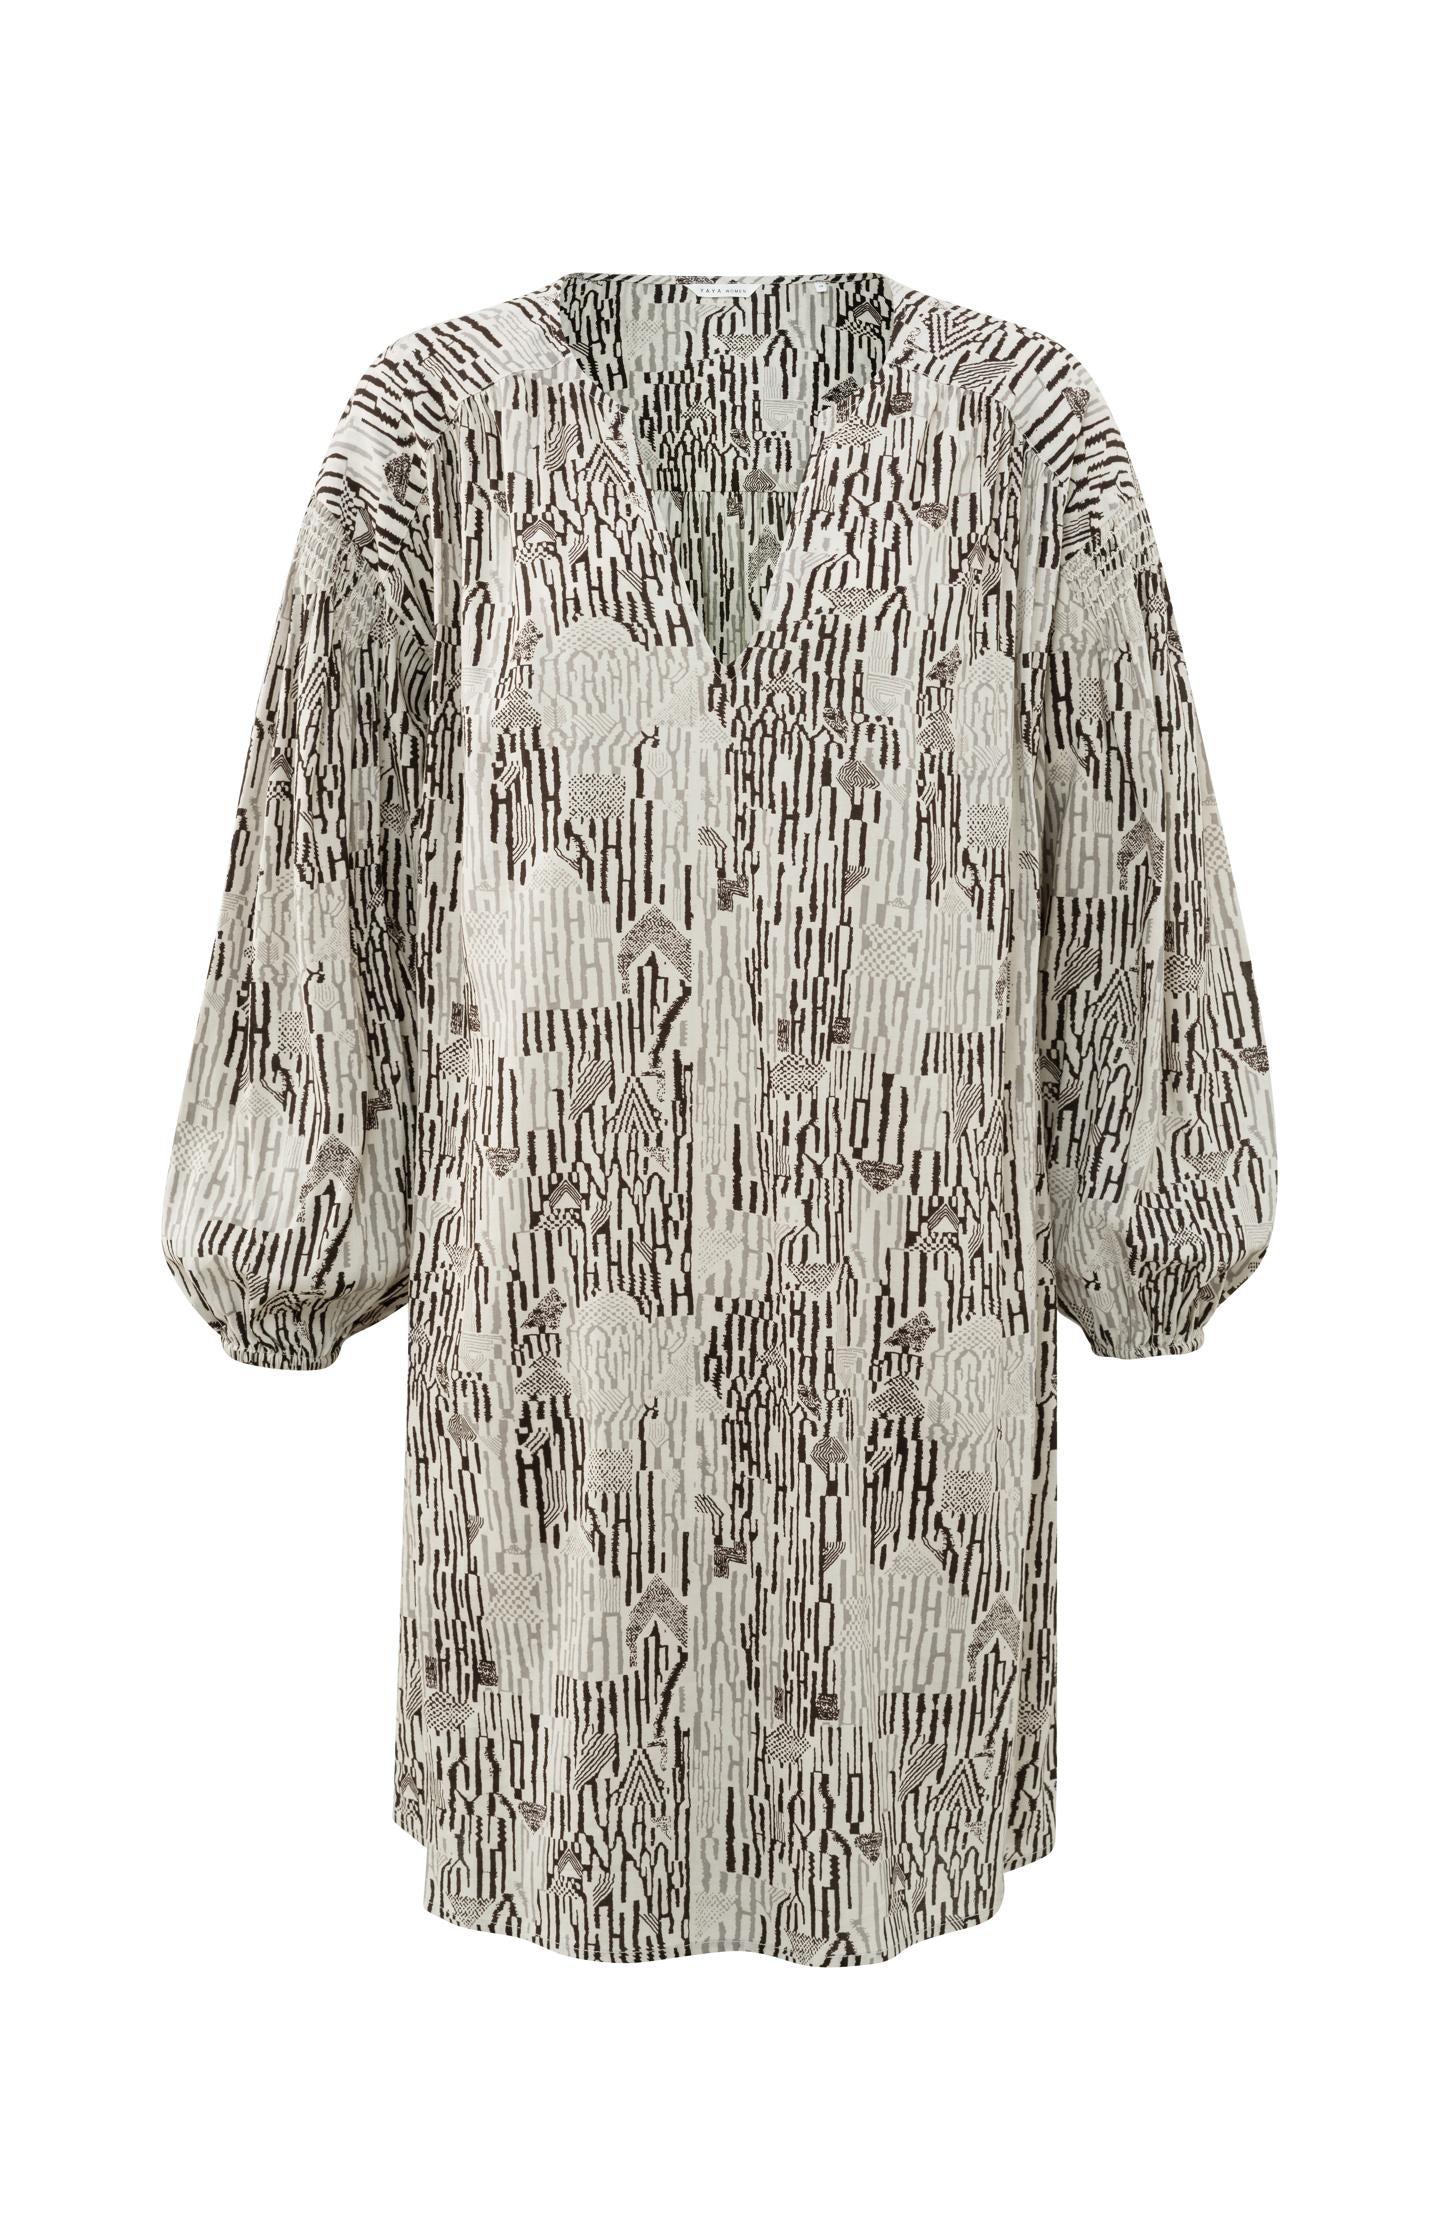 Kaftan dress with V-neck, long sleeves and graphic print - Moonstruck Grey Dessin - Type: product